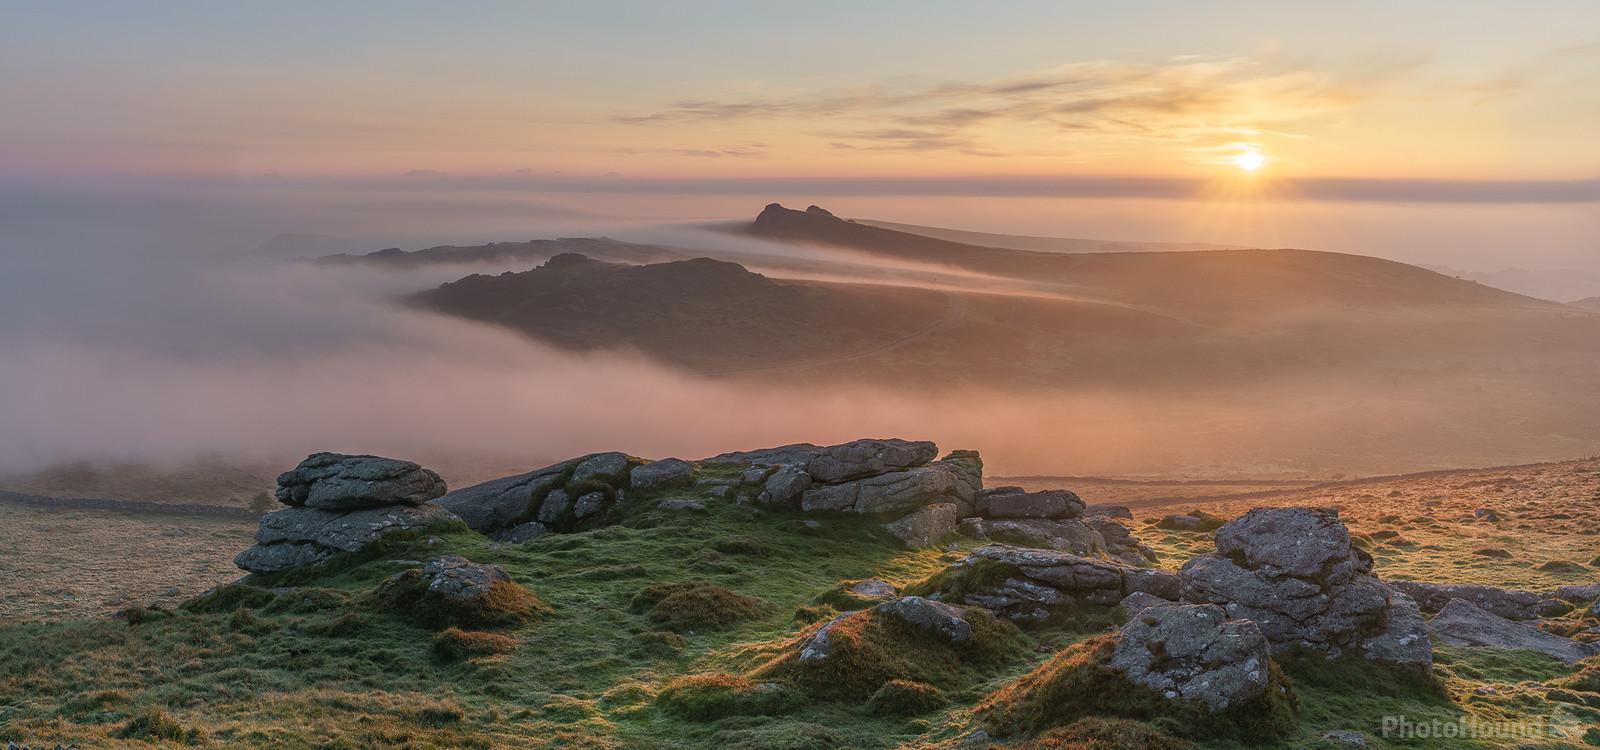 Image of Rippon Tor by Richard Fox